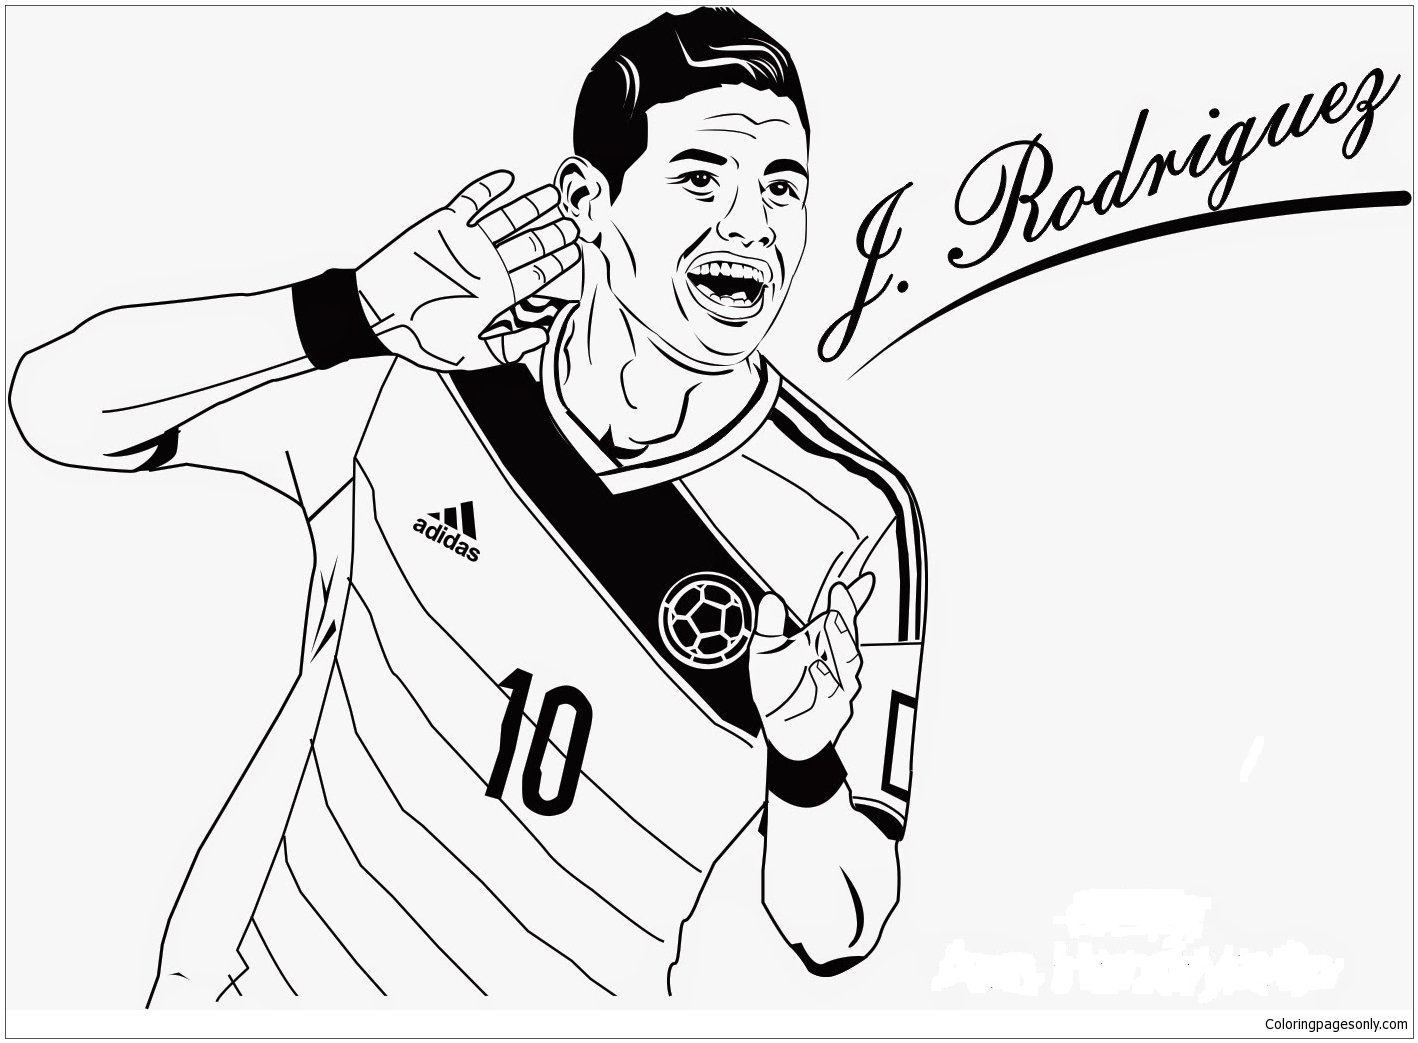 James Rodriguez-image 7 Coloring Page